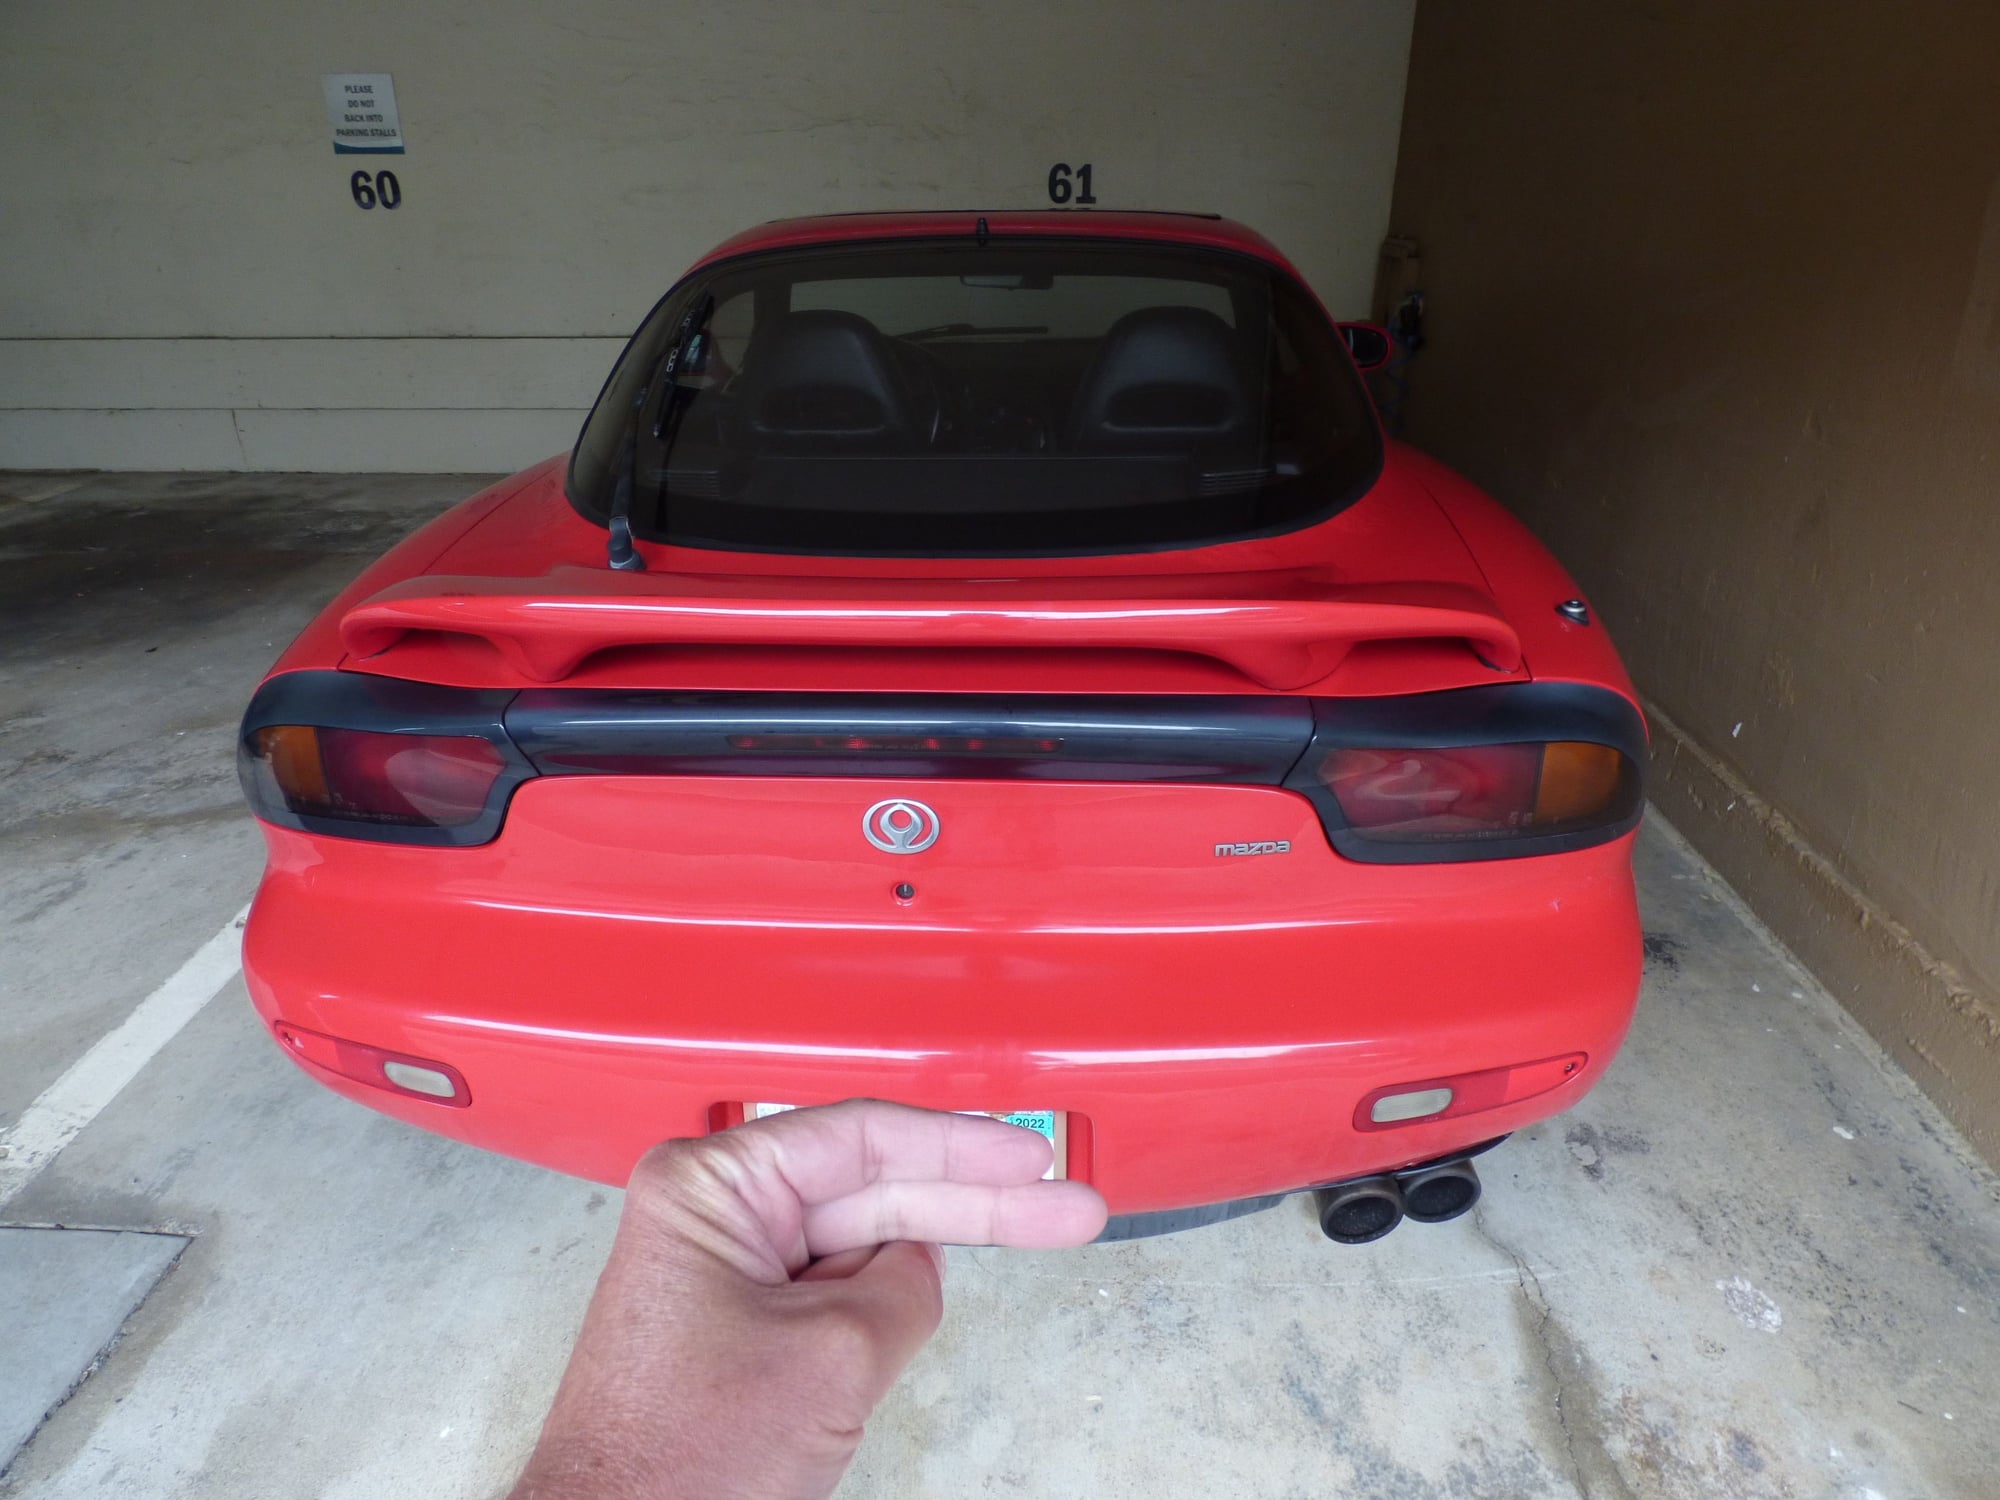 1993 Mazda RX-7 - One owner Touring model. - Used - VIN JM1FD3310P0202657 - 251,000 Miles - 2WD - Automatic - Coupe - Red - Pacifica, CA 94044, United States